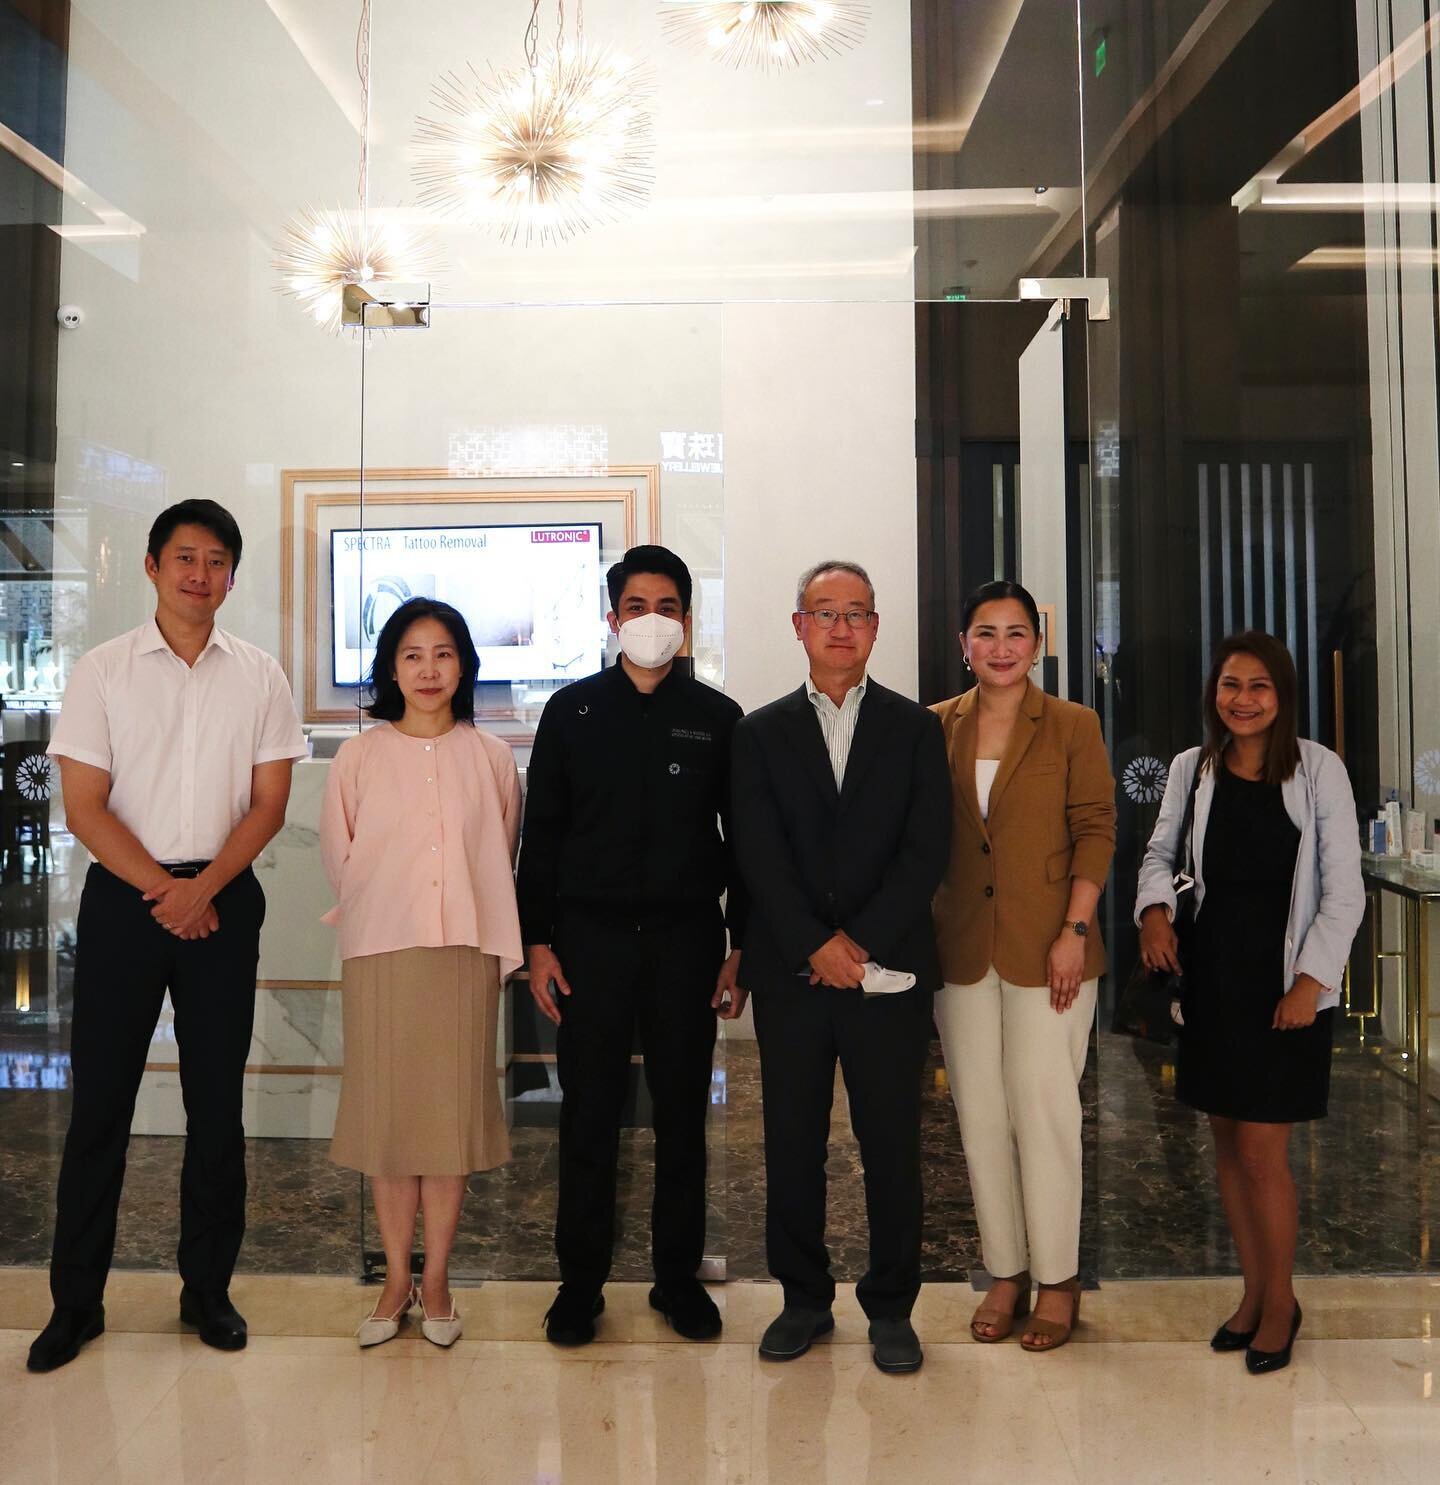 Our Medical Director with the CEO and President of Exocobio Mr. Byong Seung Cho. 

Exocobio, a world leading company in the development of cosmeceutical and biopharmaceutical products, ensures products are highly purified and highly efficient using t